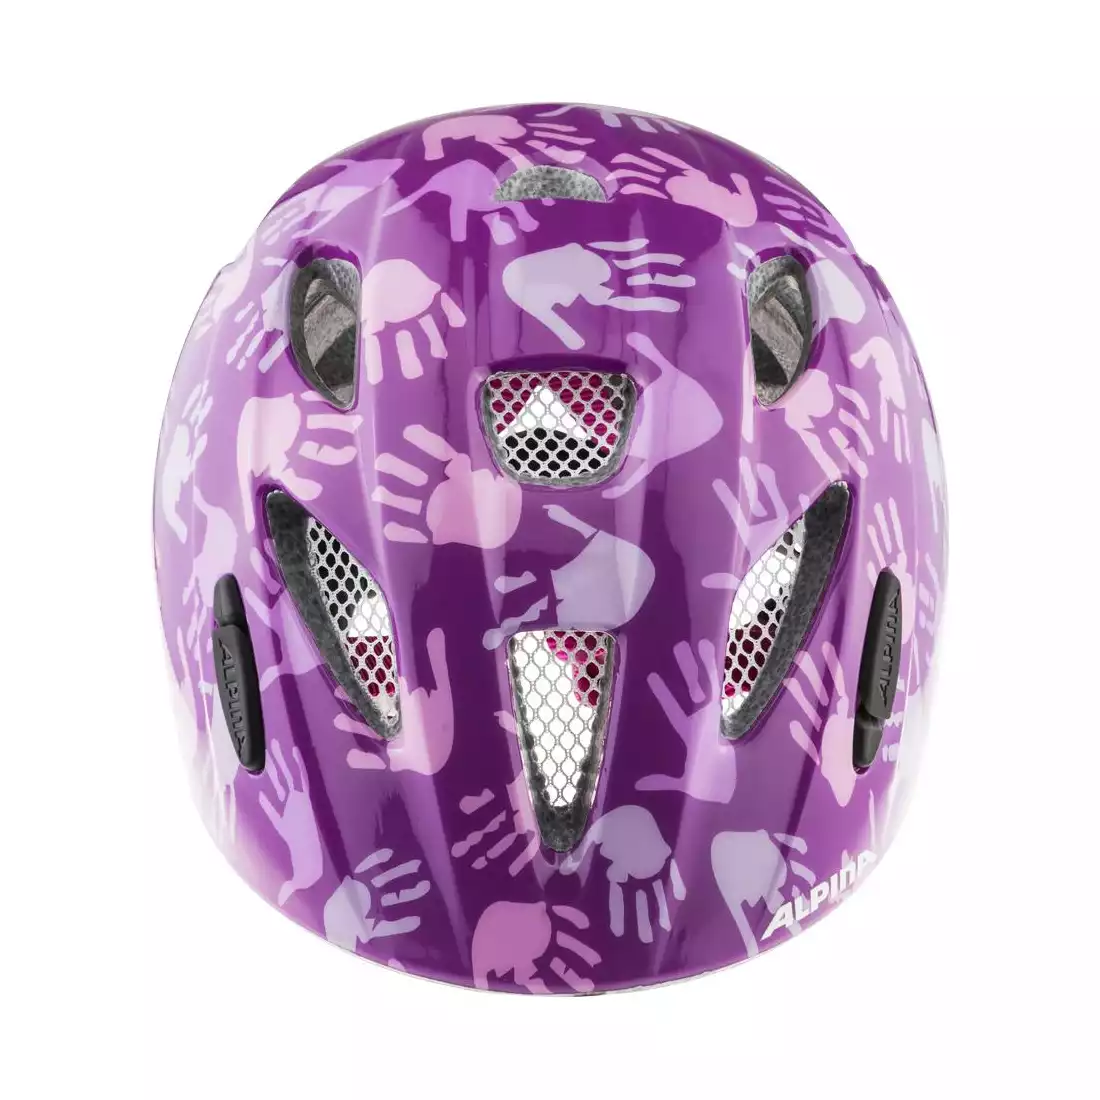 ALPINA KASK XIMO  BERRY HANDS GLOSS 47-51 new 2021 A9711156